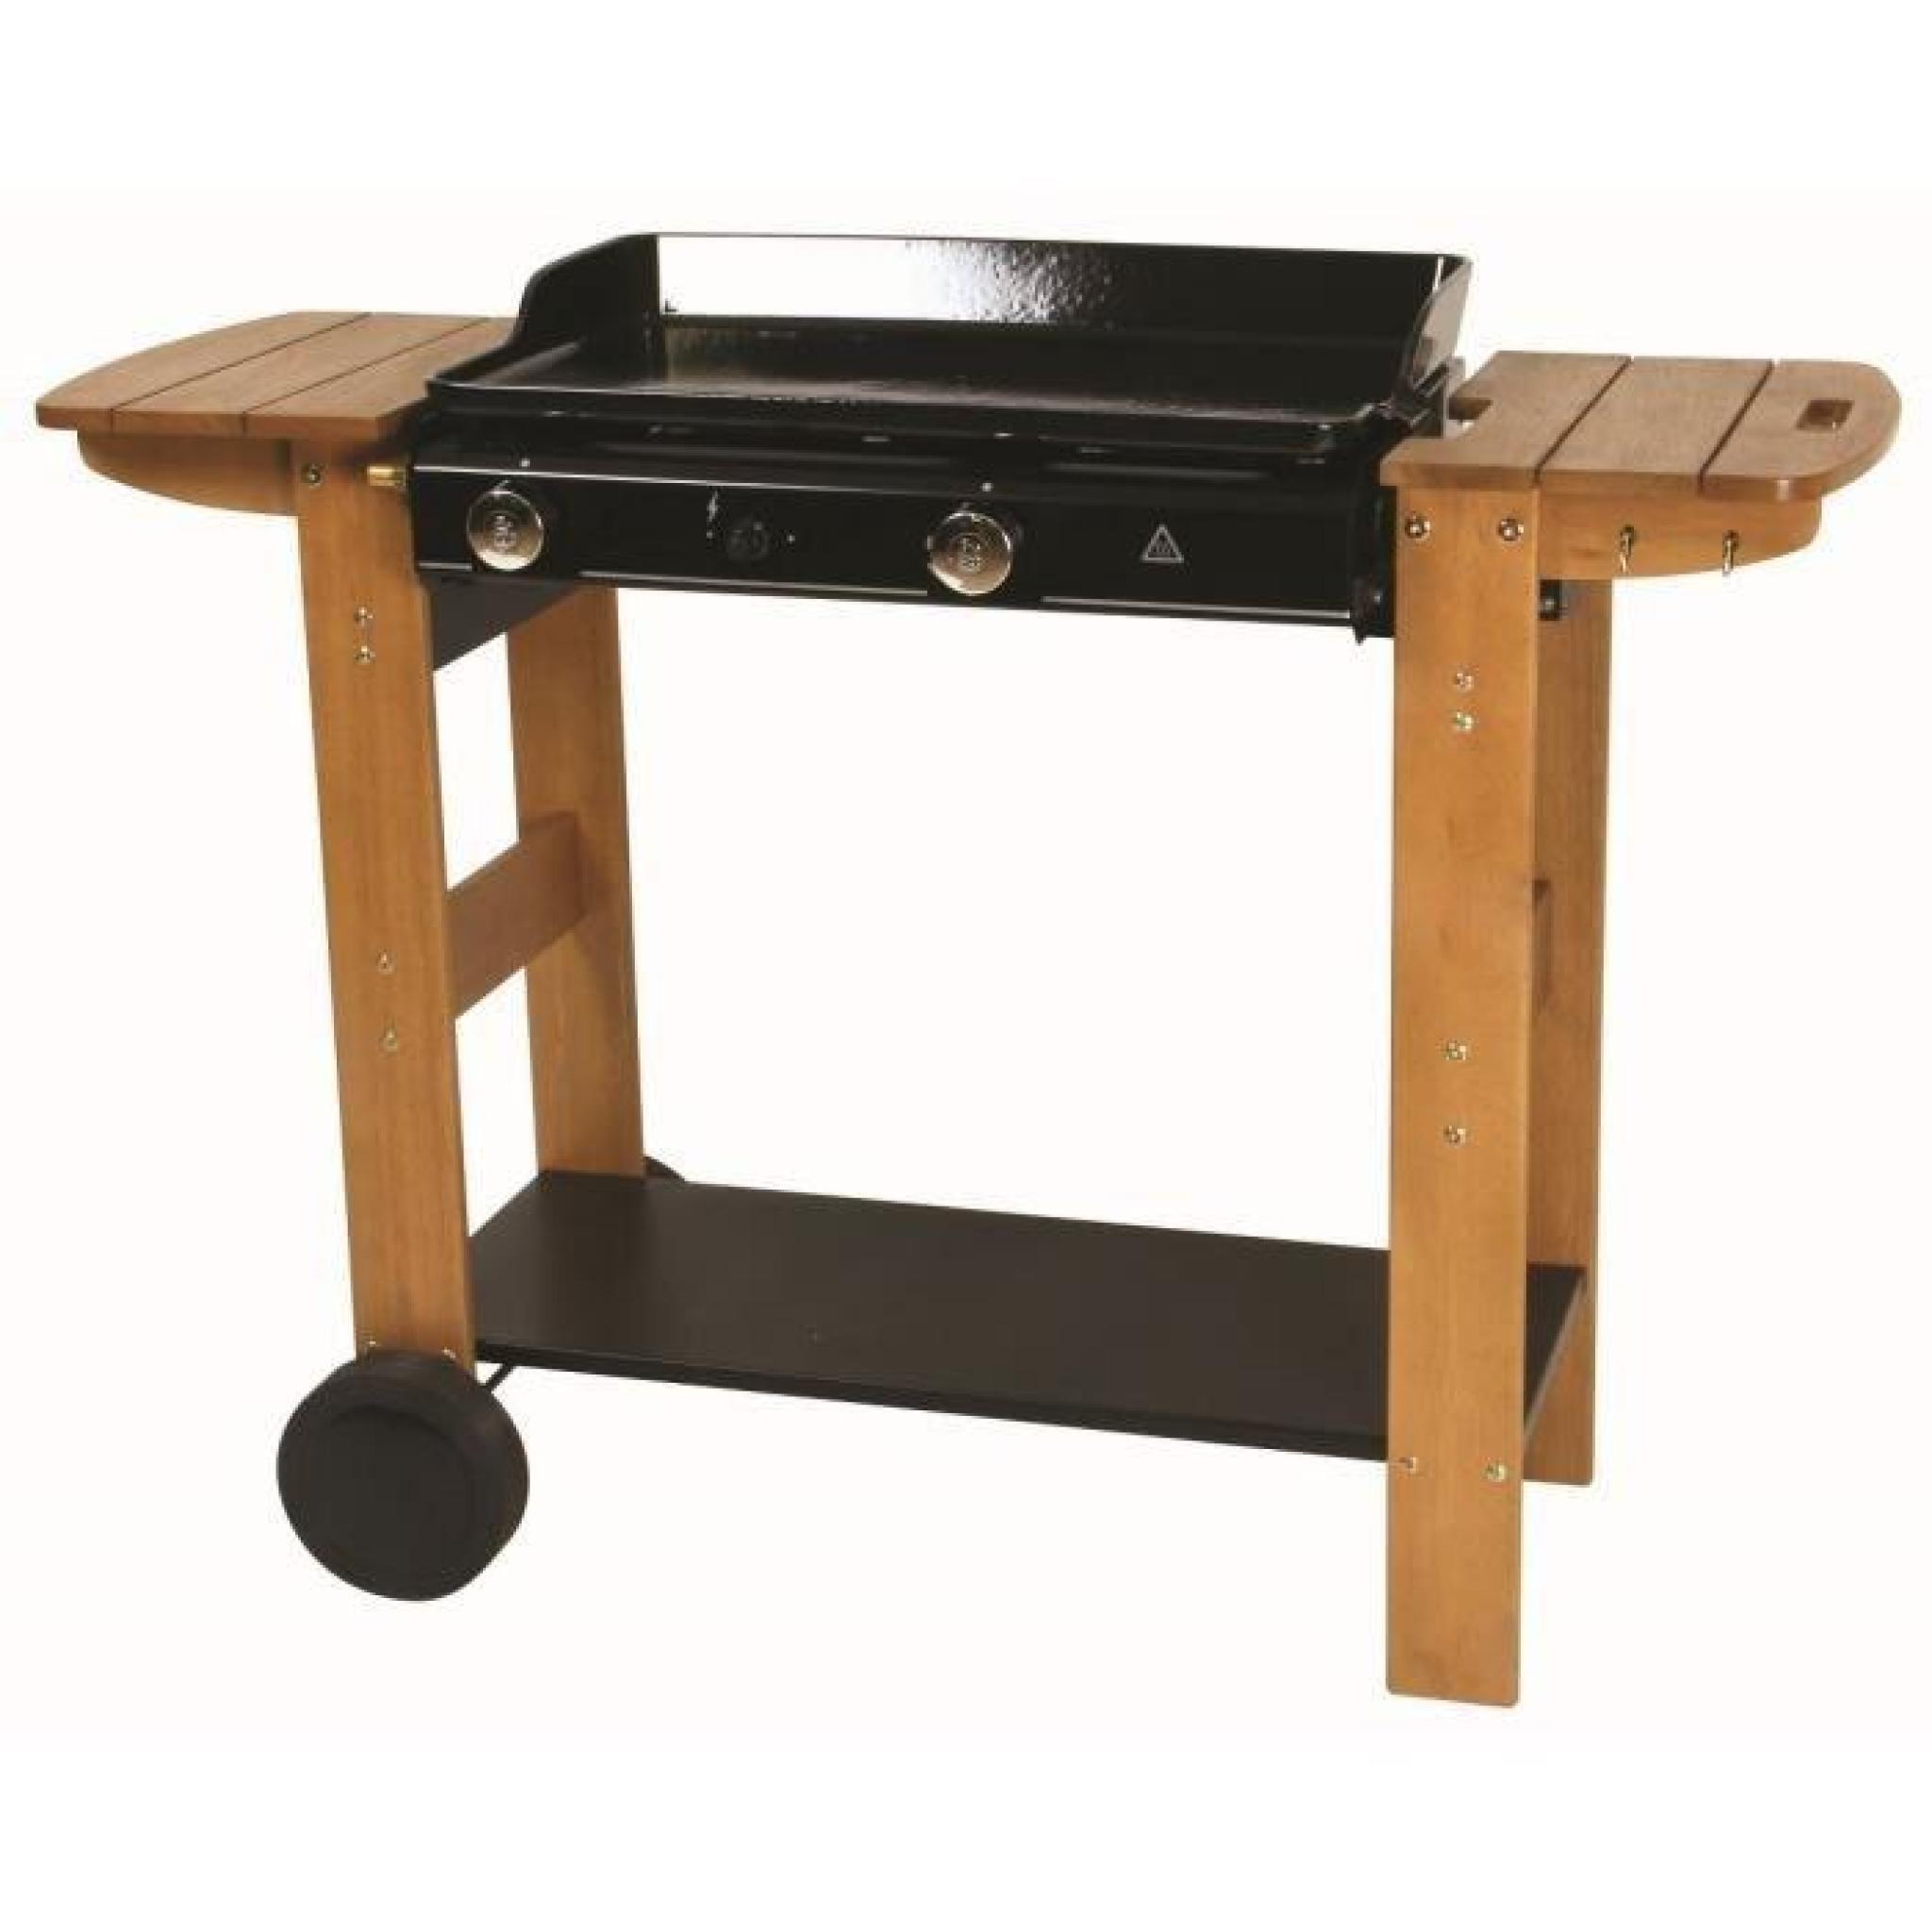 CAMBO Plancha 2 feux chariot bois 60 x 37 cm